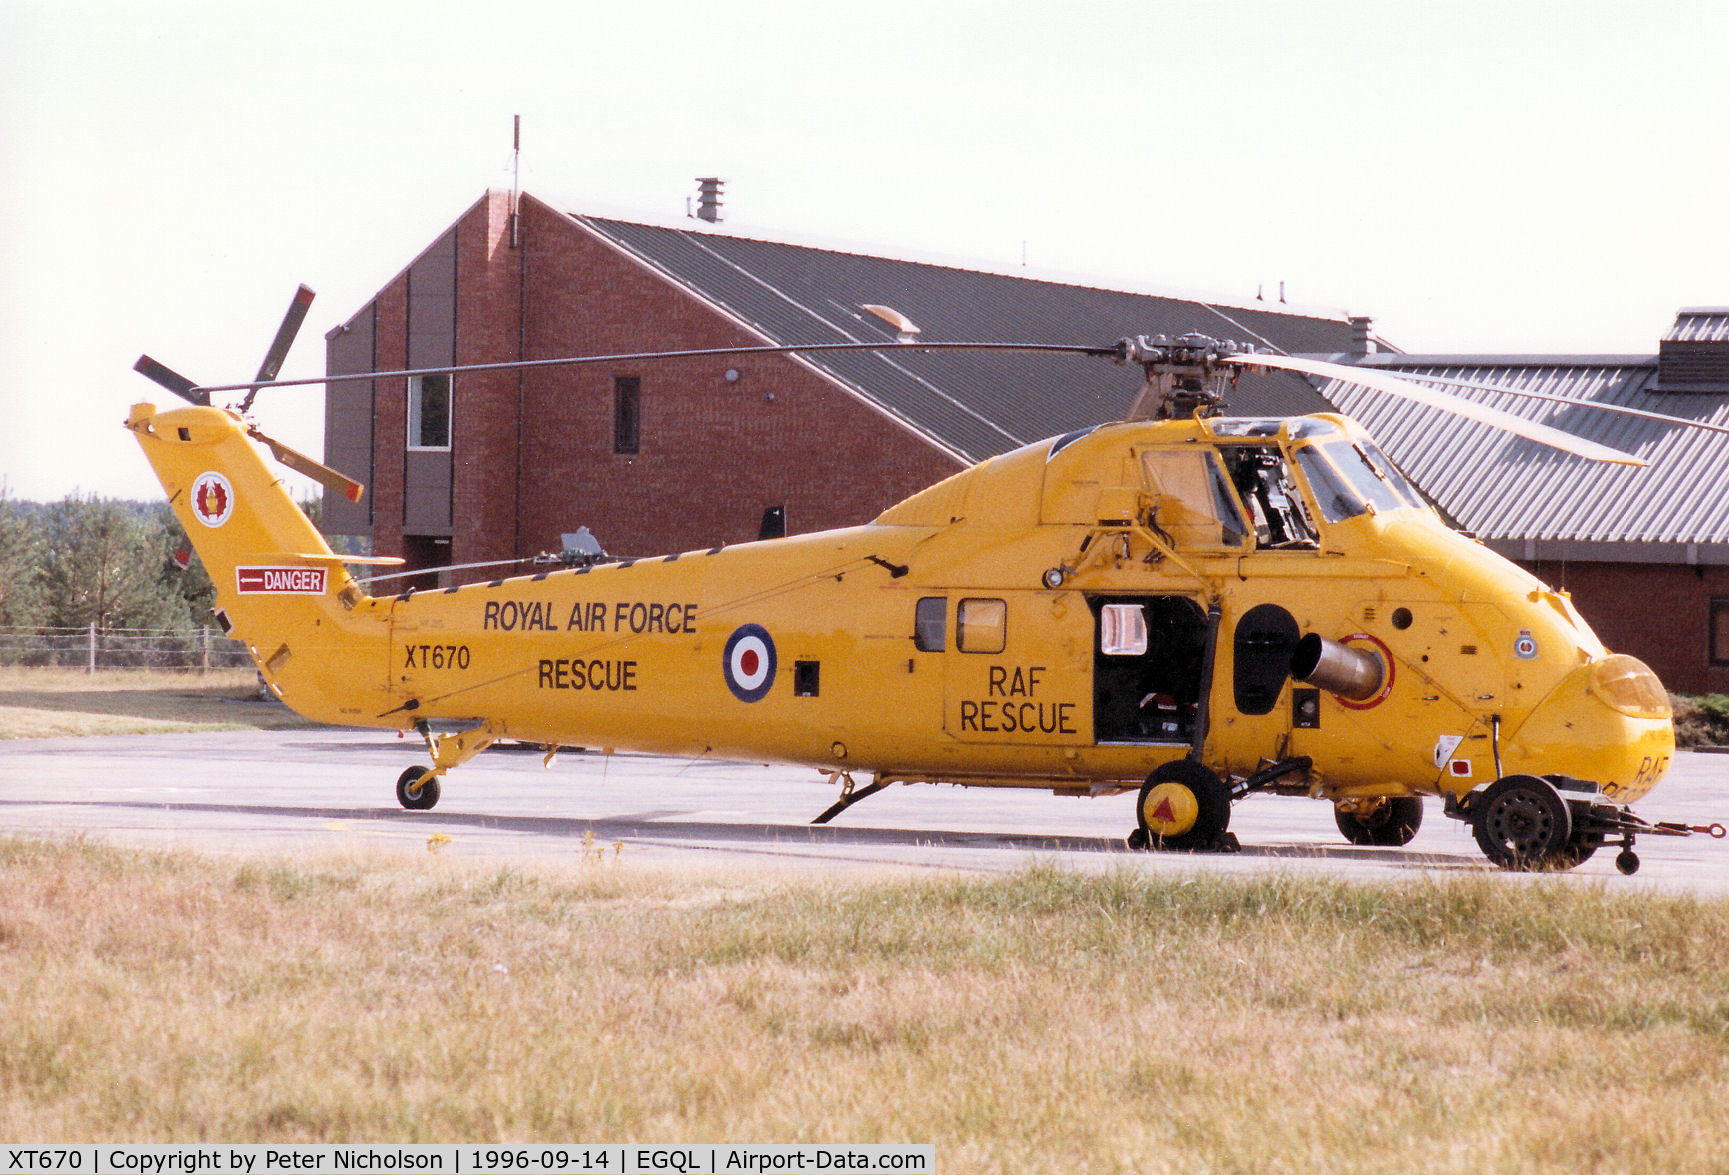 XT670, 1966 Westland Wessex HC.2 C/N WA538, Another view of the Search & Rescue Training Unit Wessex HC.2 on display at the 1996 RAF Leuchars Airshow.